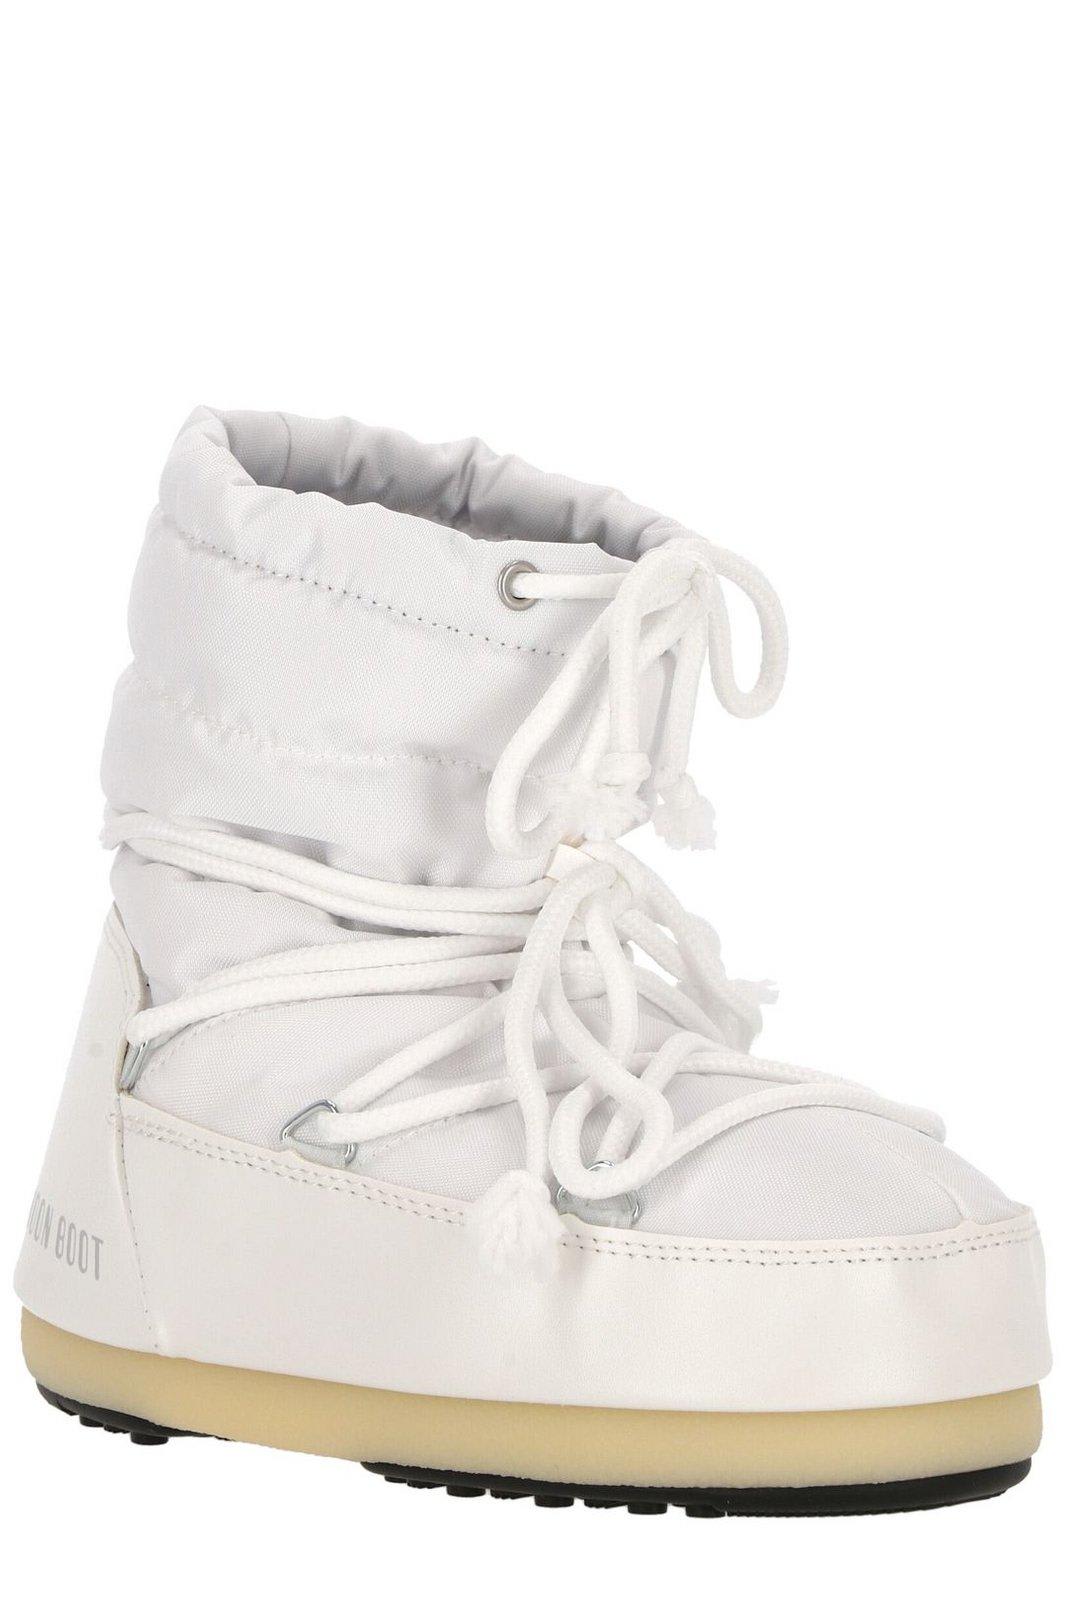 Shop Moon Boot Round Toe Lace-up Ankle Boots In White